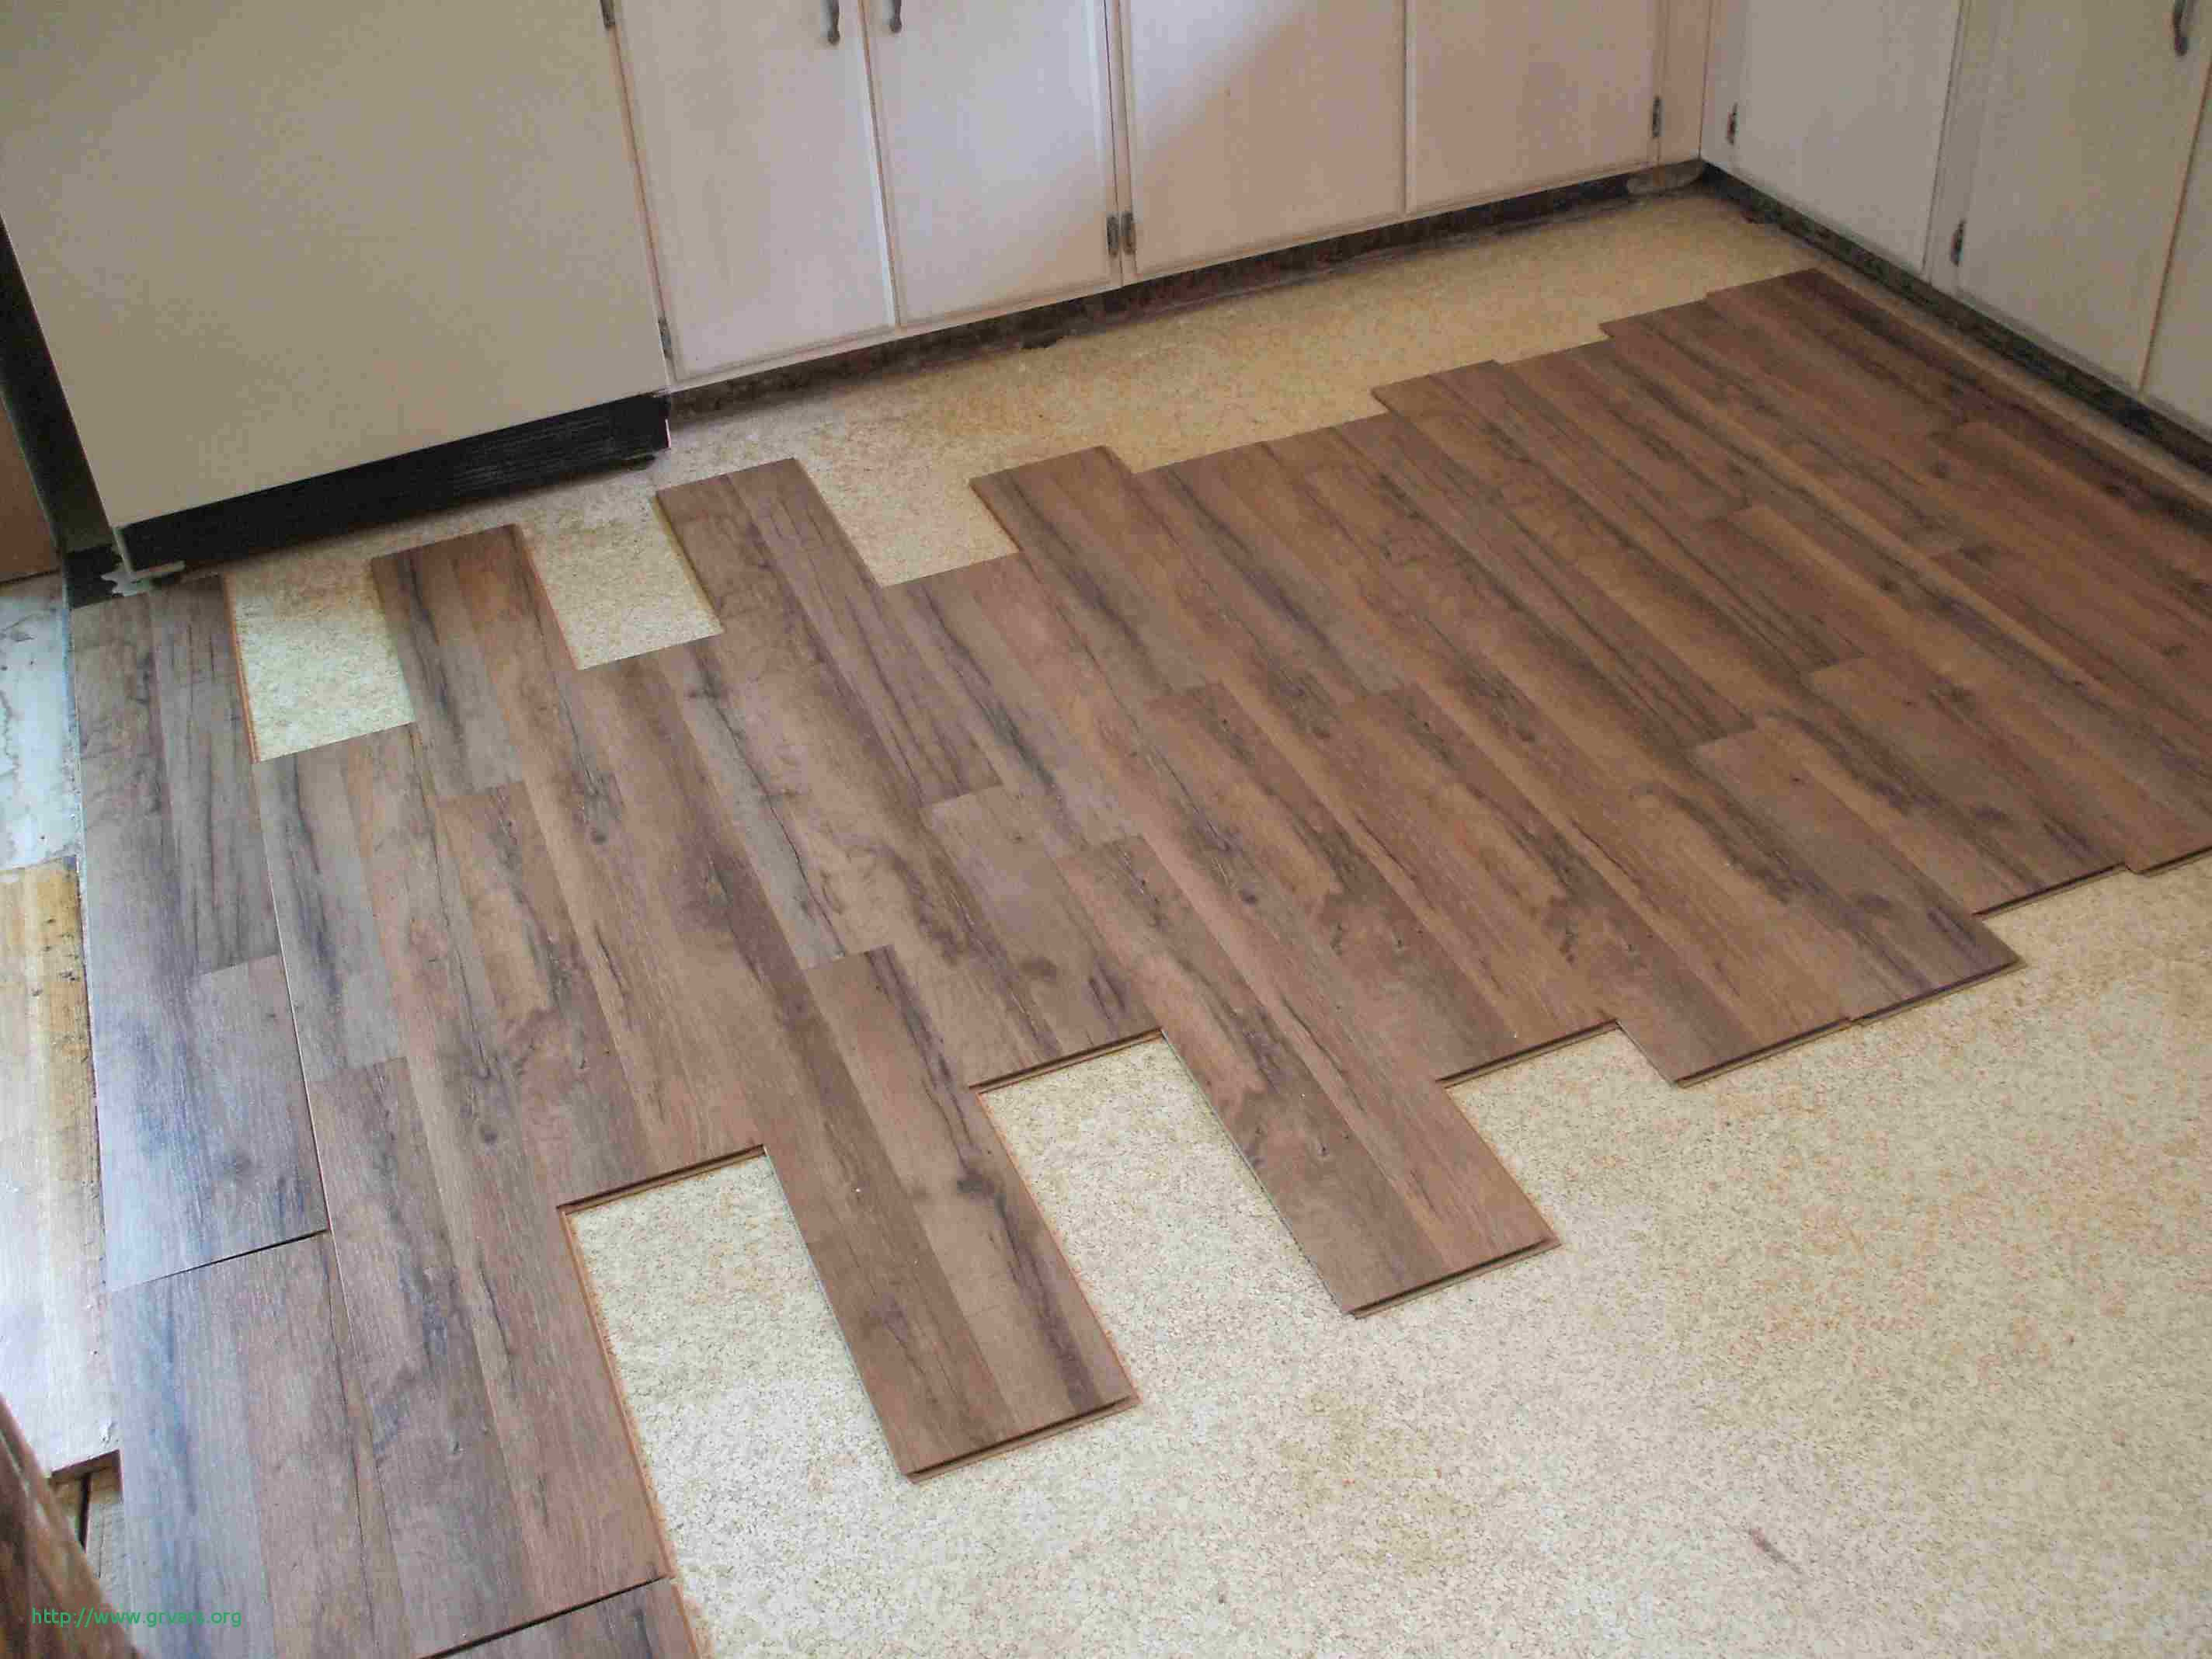 home depot hardwood floor installation cost per square foot of average cost per square foot to install hardwood floors charmant a throughout average cost per square foot to install hardwood floors luxe how to lay laminate flooring in